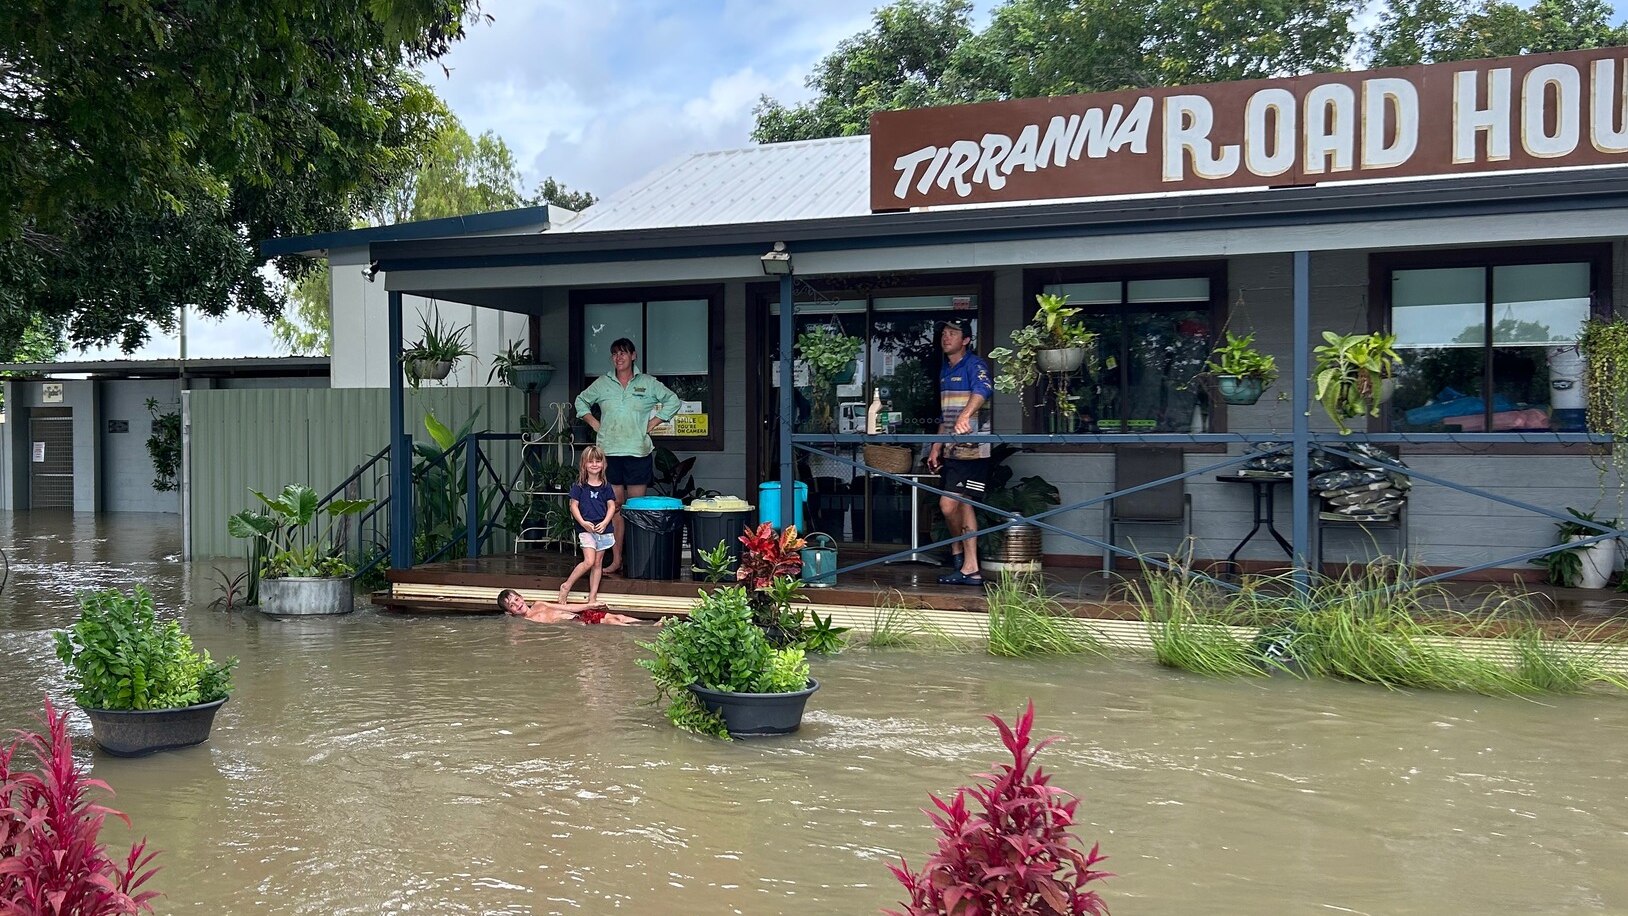 tirranna springs roadhouse owners hope for strong outback queensland tourist season during flood recovery